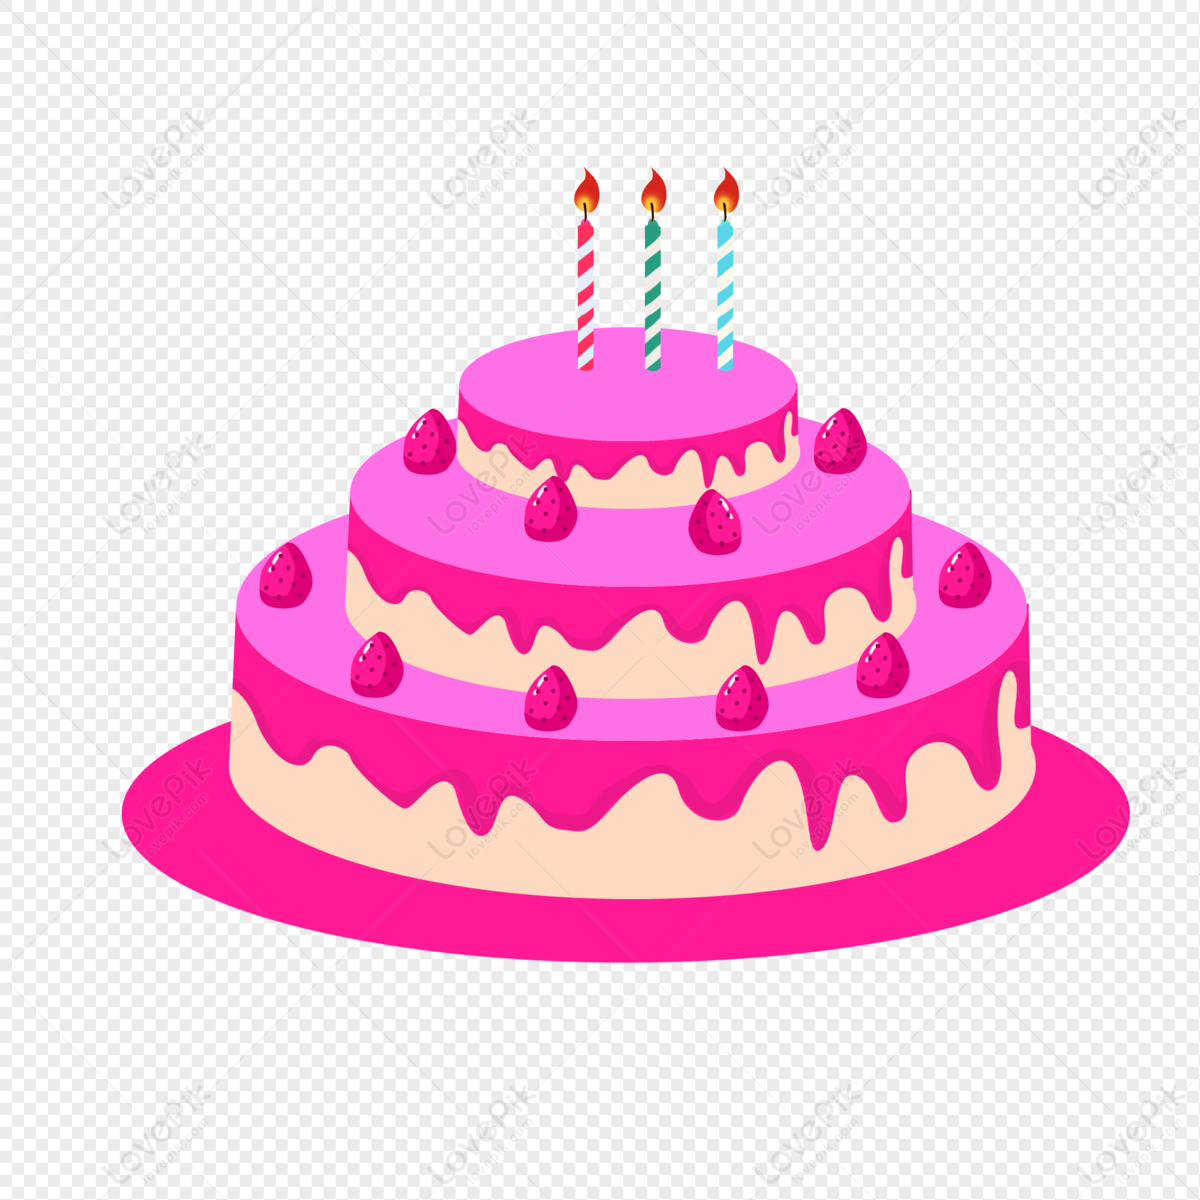 Cake PNG image transparent image download, size: 800x600px